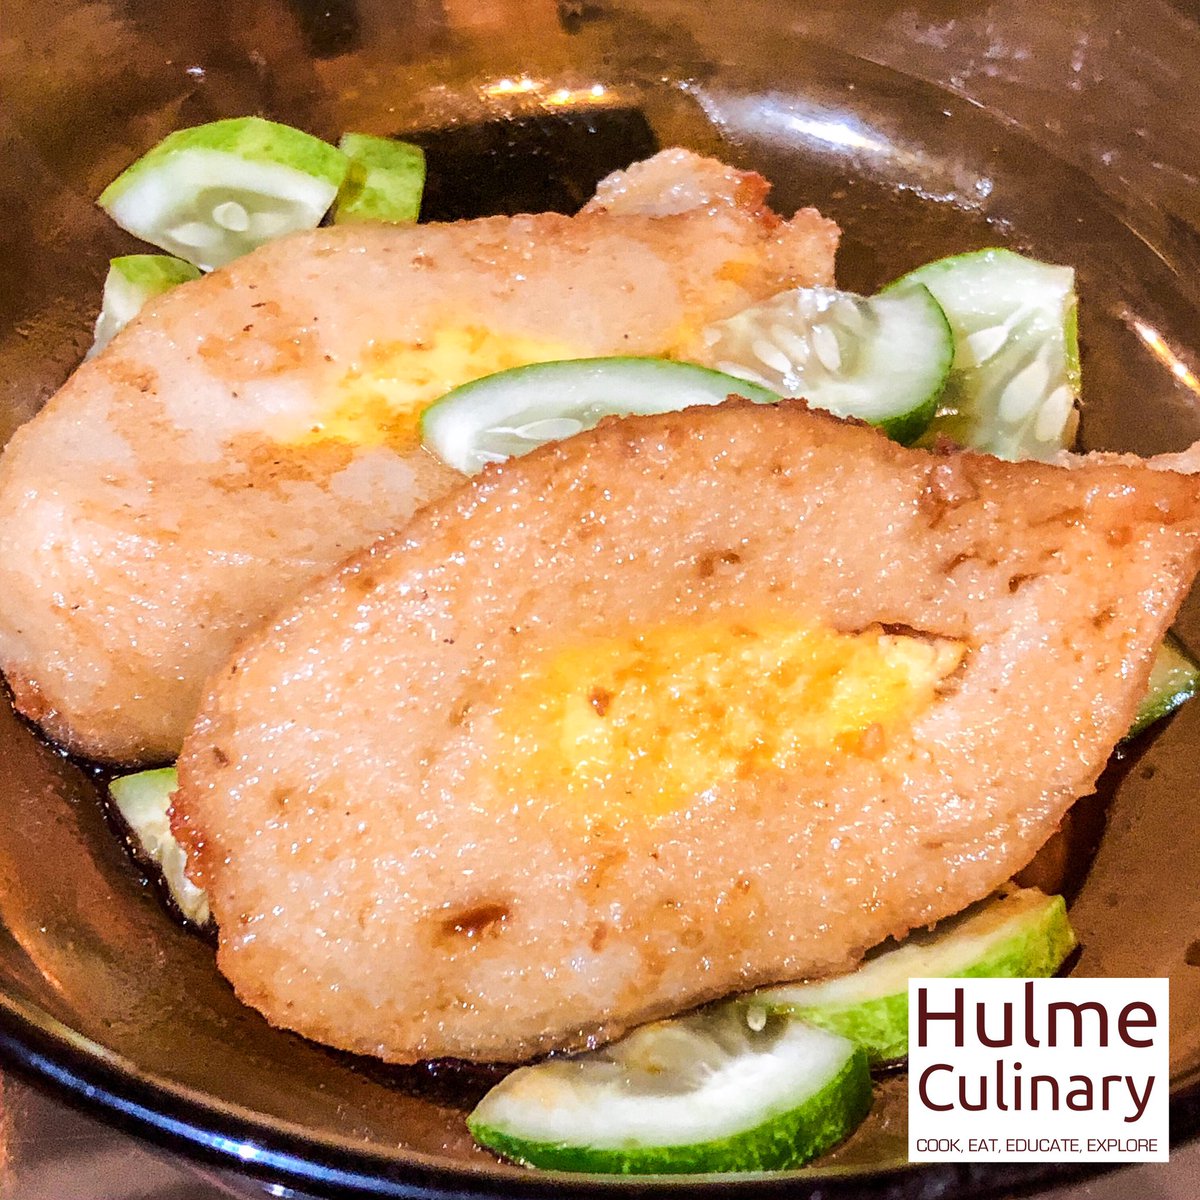 South Sumatera delicacy! Made from Fish and Tapioca! 
#hulmeculinary #food #indonesian #explorefood #cuisine